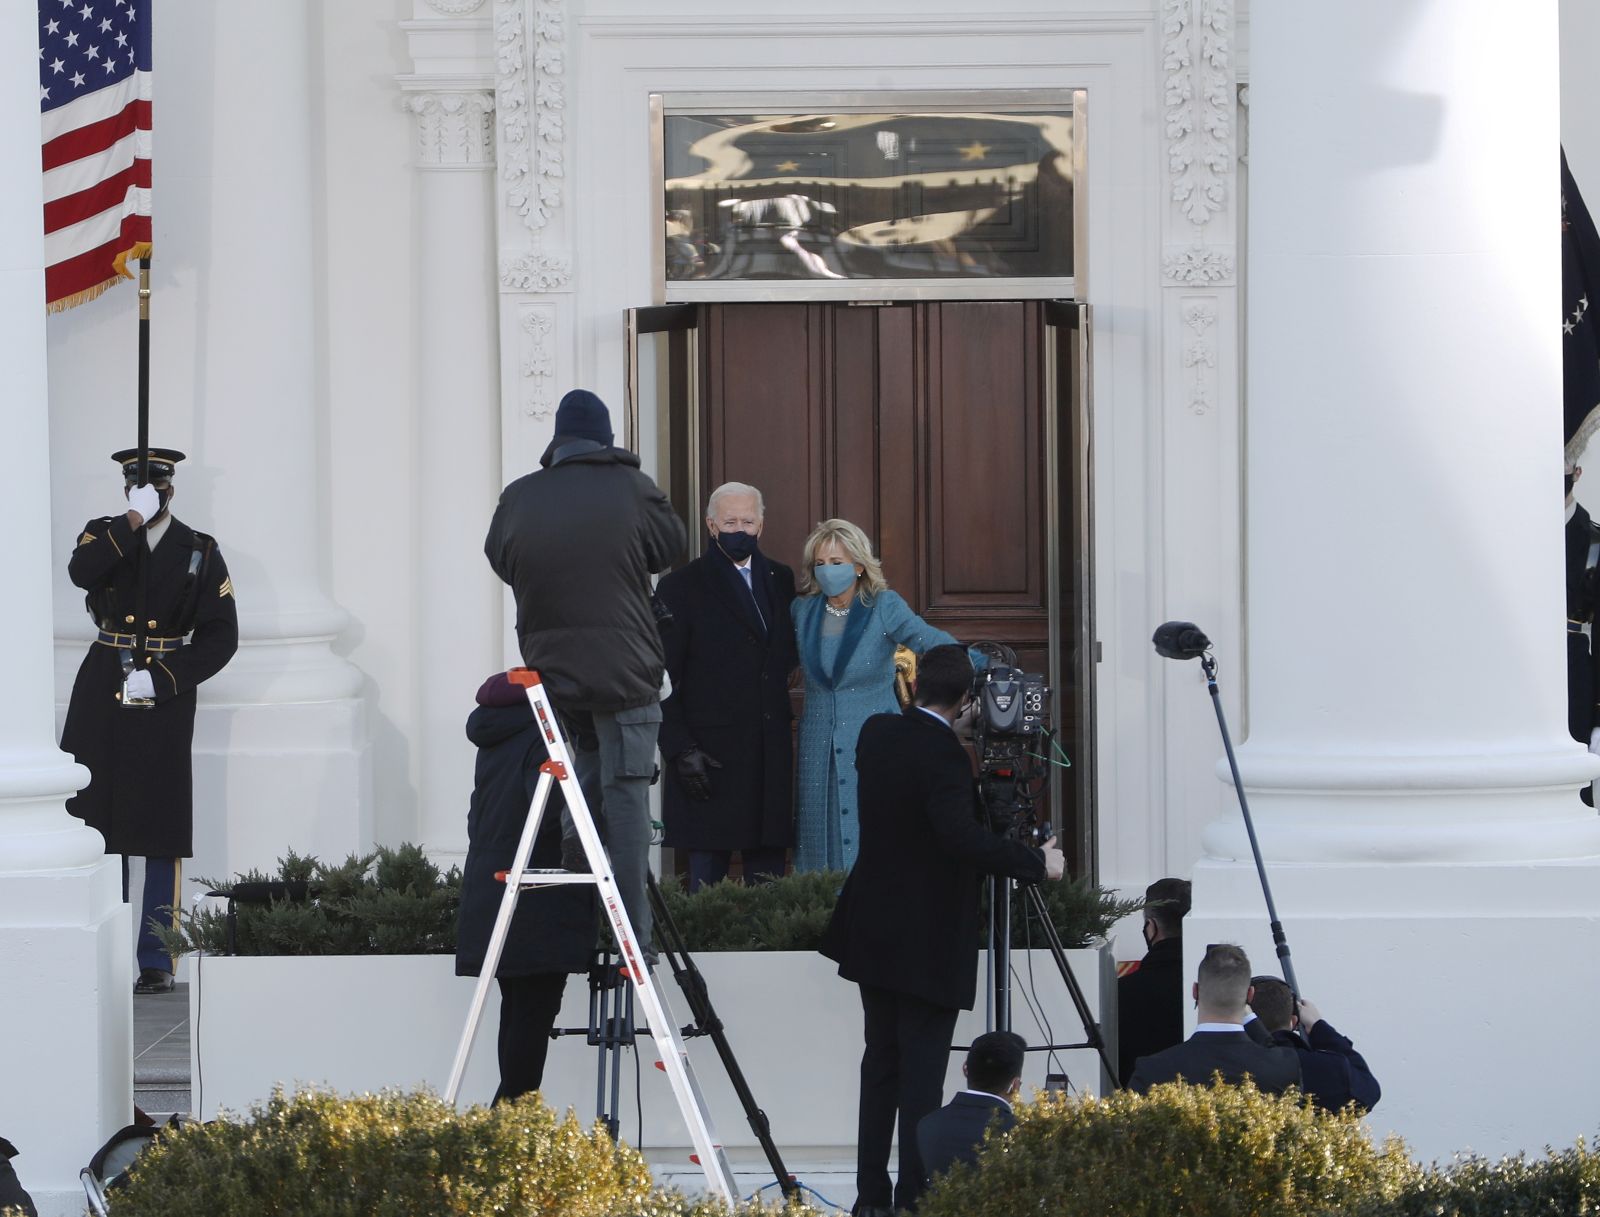 epa08954154 US President Joe Biden and First Lady Dr. Jill Biden pose as they prepare to enter the White House following the inauguration ceremony on the West Front of the US Capitol in Washington, DC, USA, 20 January 2021. Biden won the 03 November 2020 election to become the 46th President of the United States of America.  EPA/SHAWN THEW